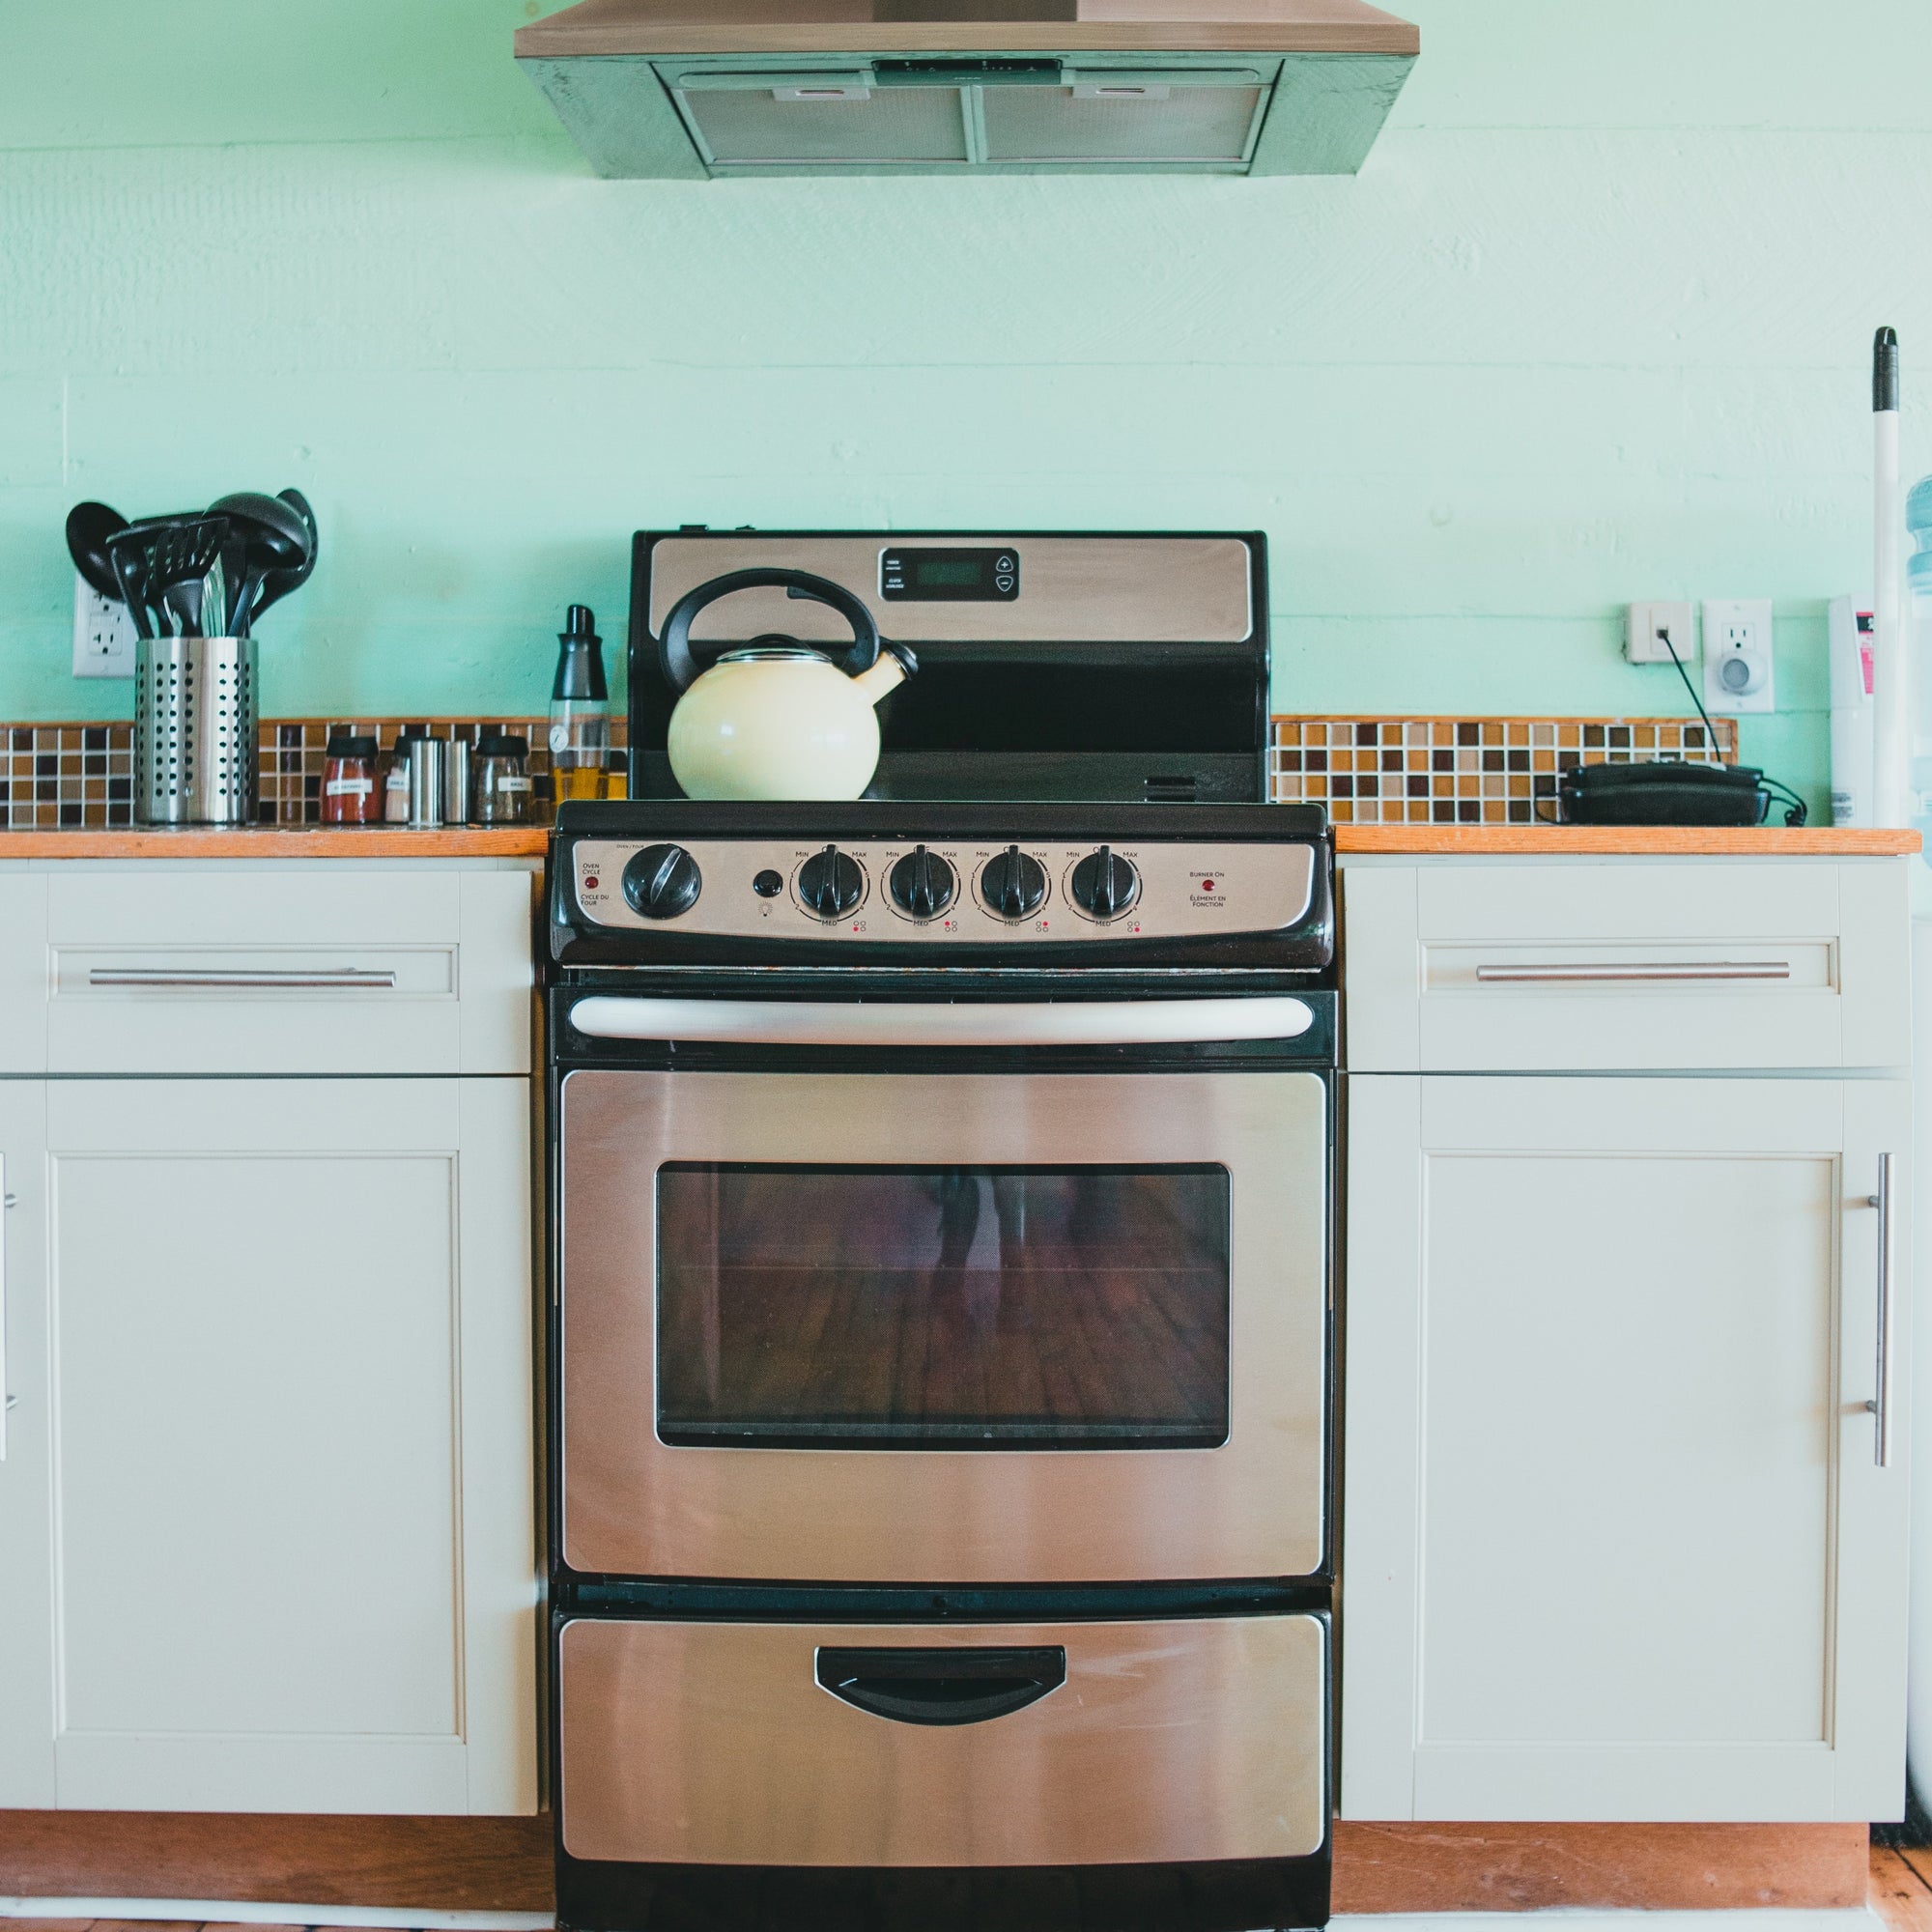 15 Oven Cleaning Hacks That Don't Use Harsh Chemicals